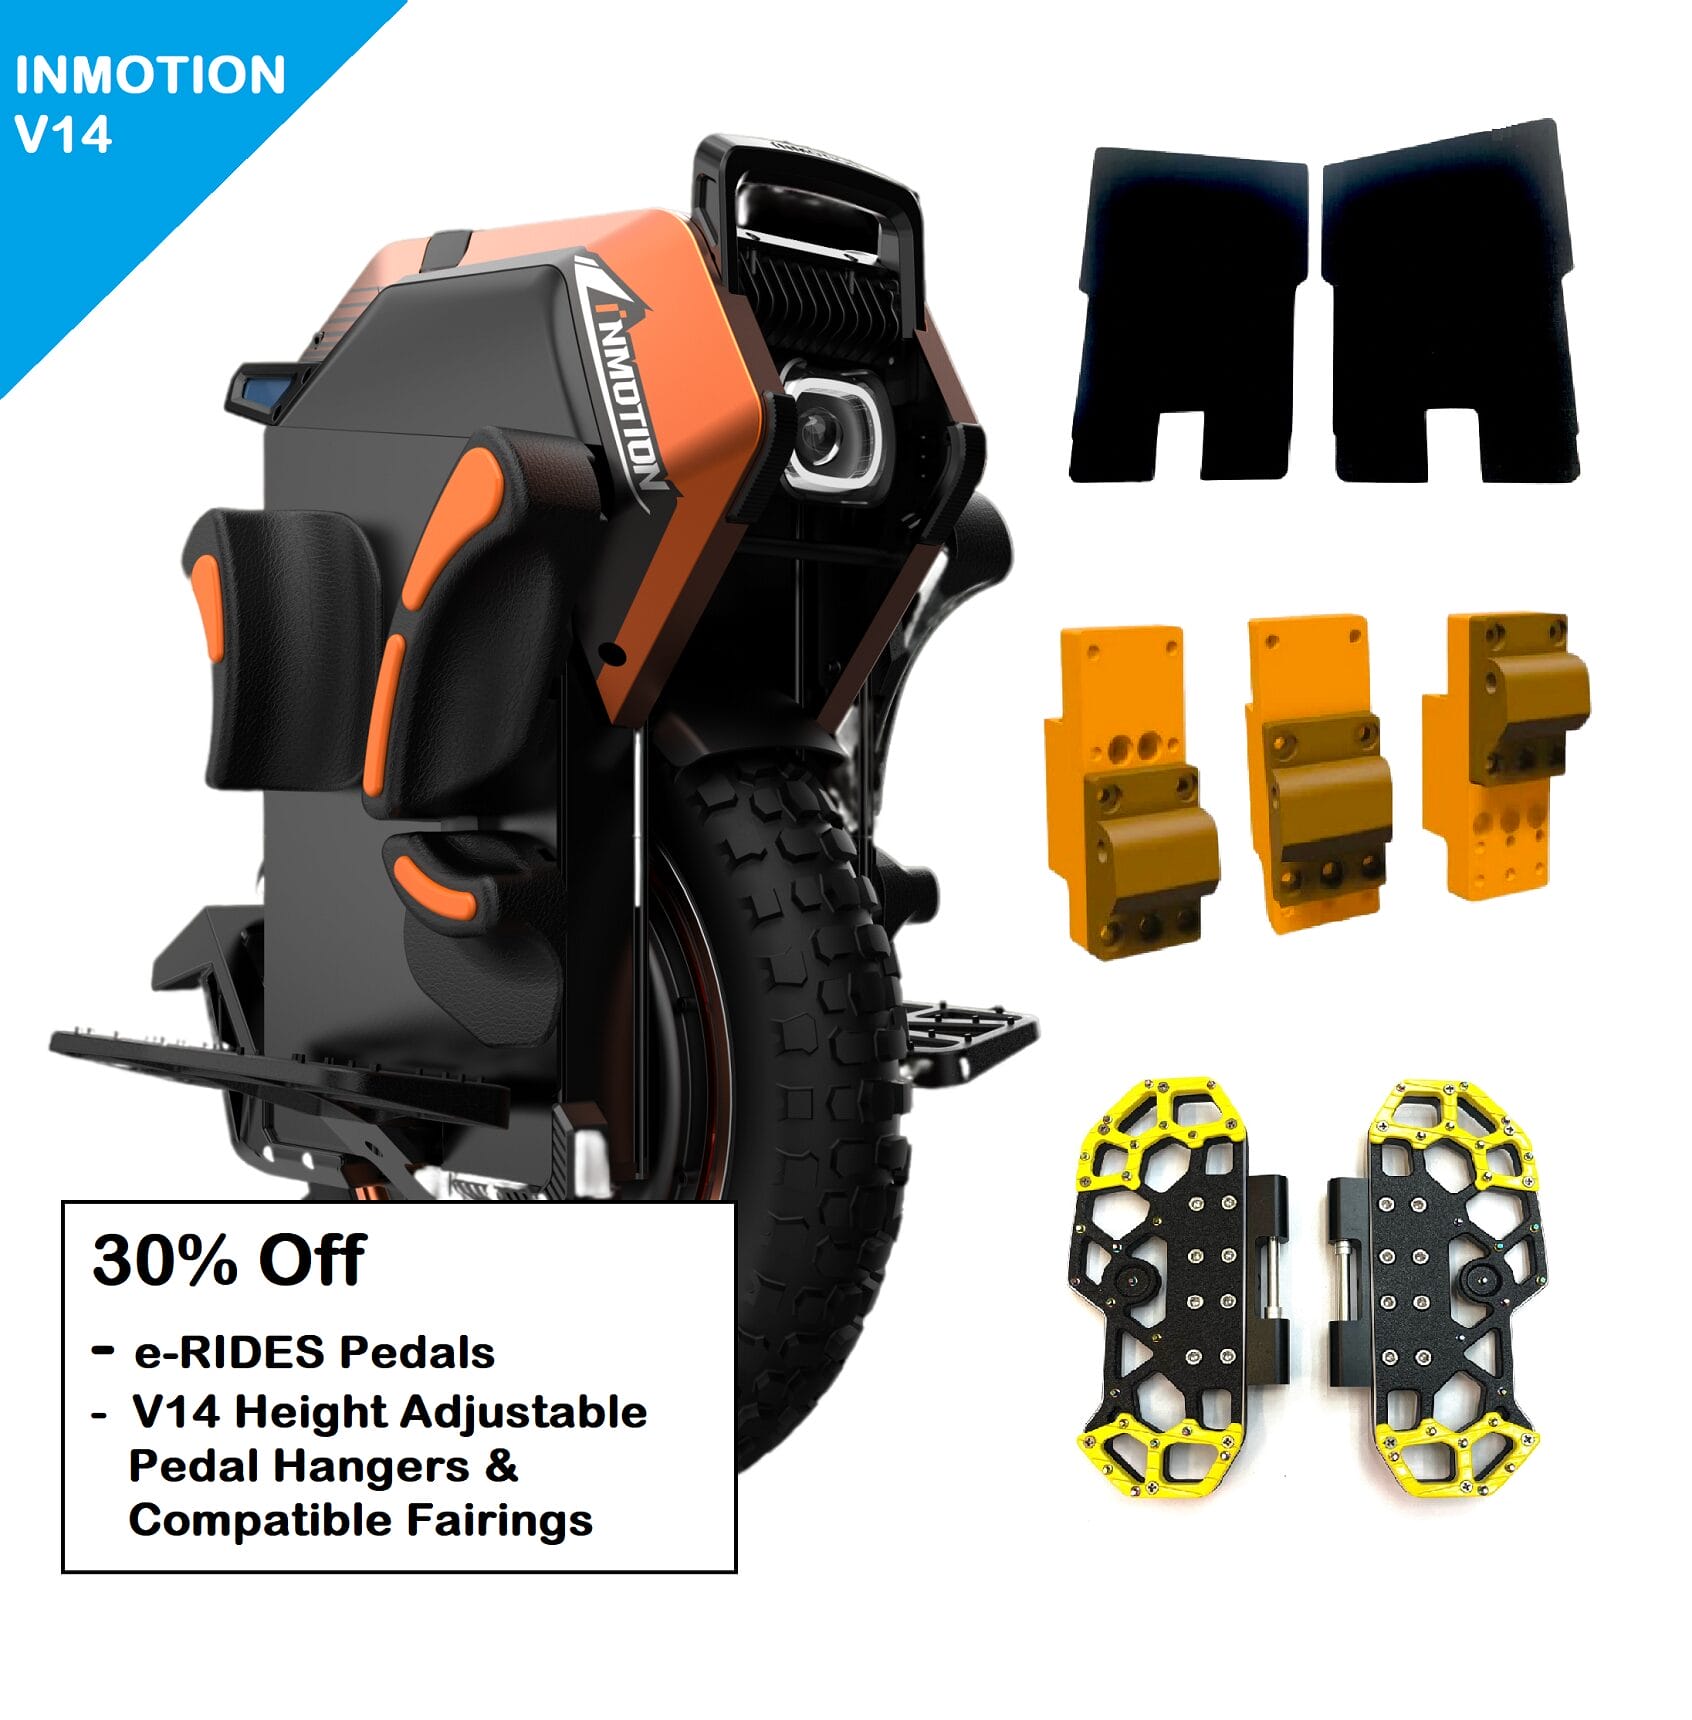 Inmotion V14 Electric Unicycle New Offer Scaled